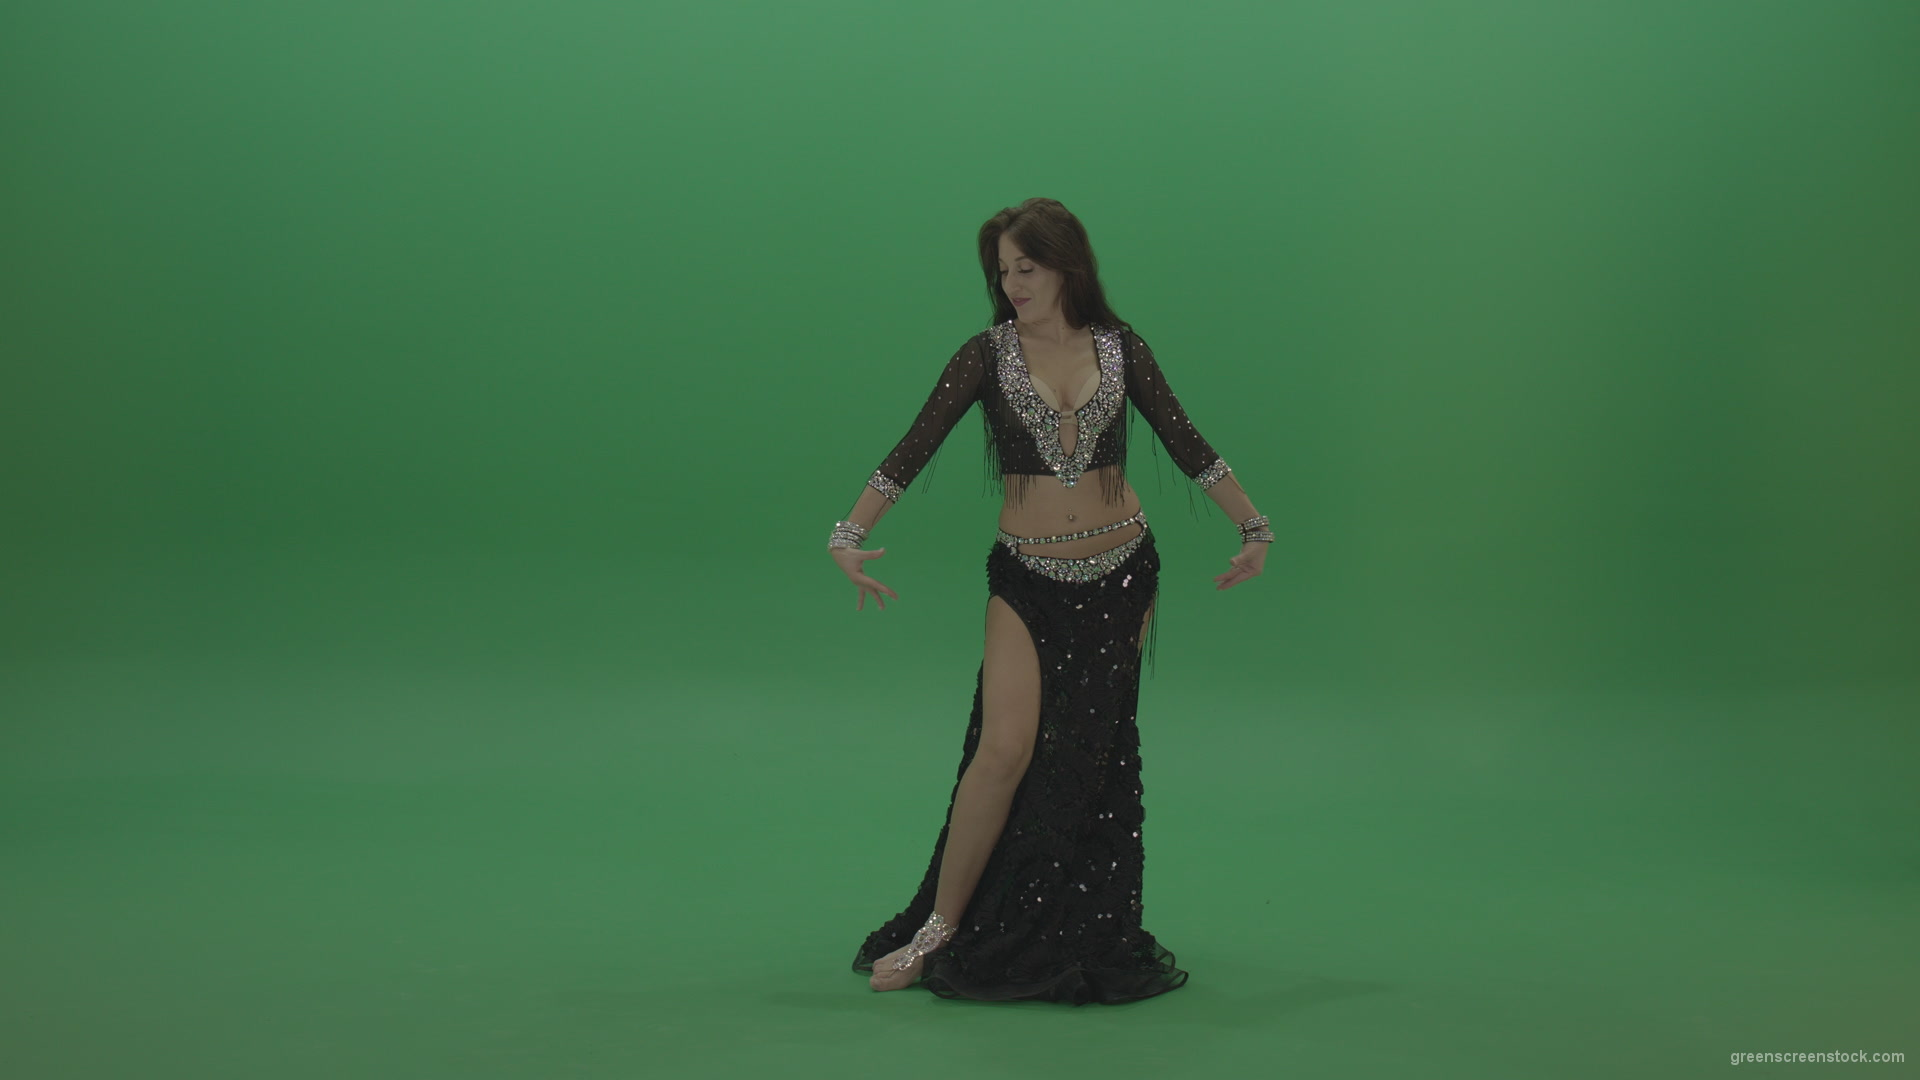 Admirable-belly-dancer-in-black-wear-display-amazing-dance-moves-over-chromakey-background_001 Green Screen Stock